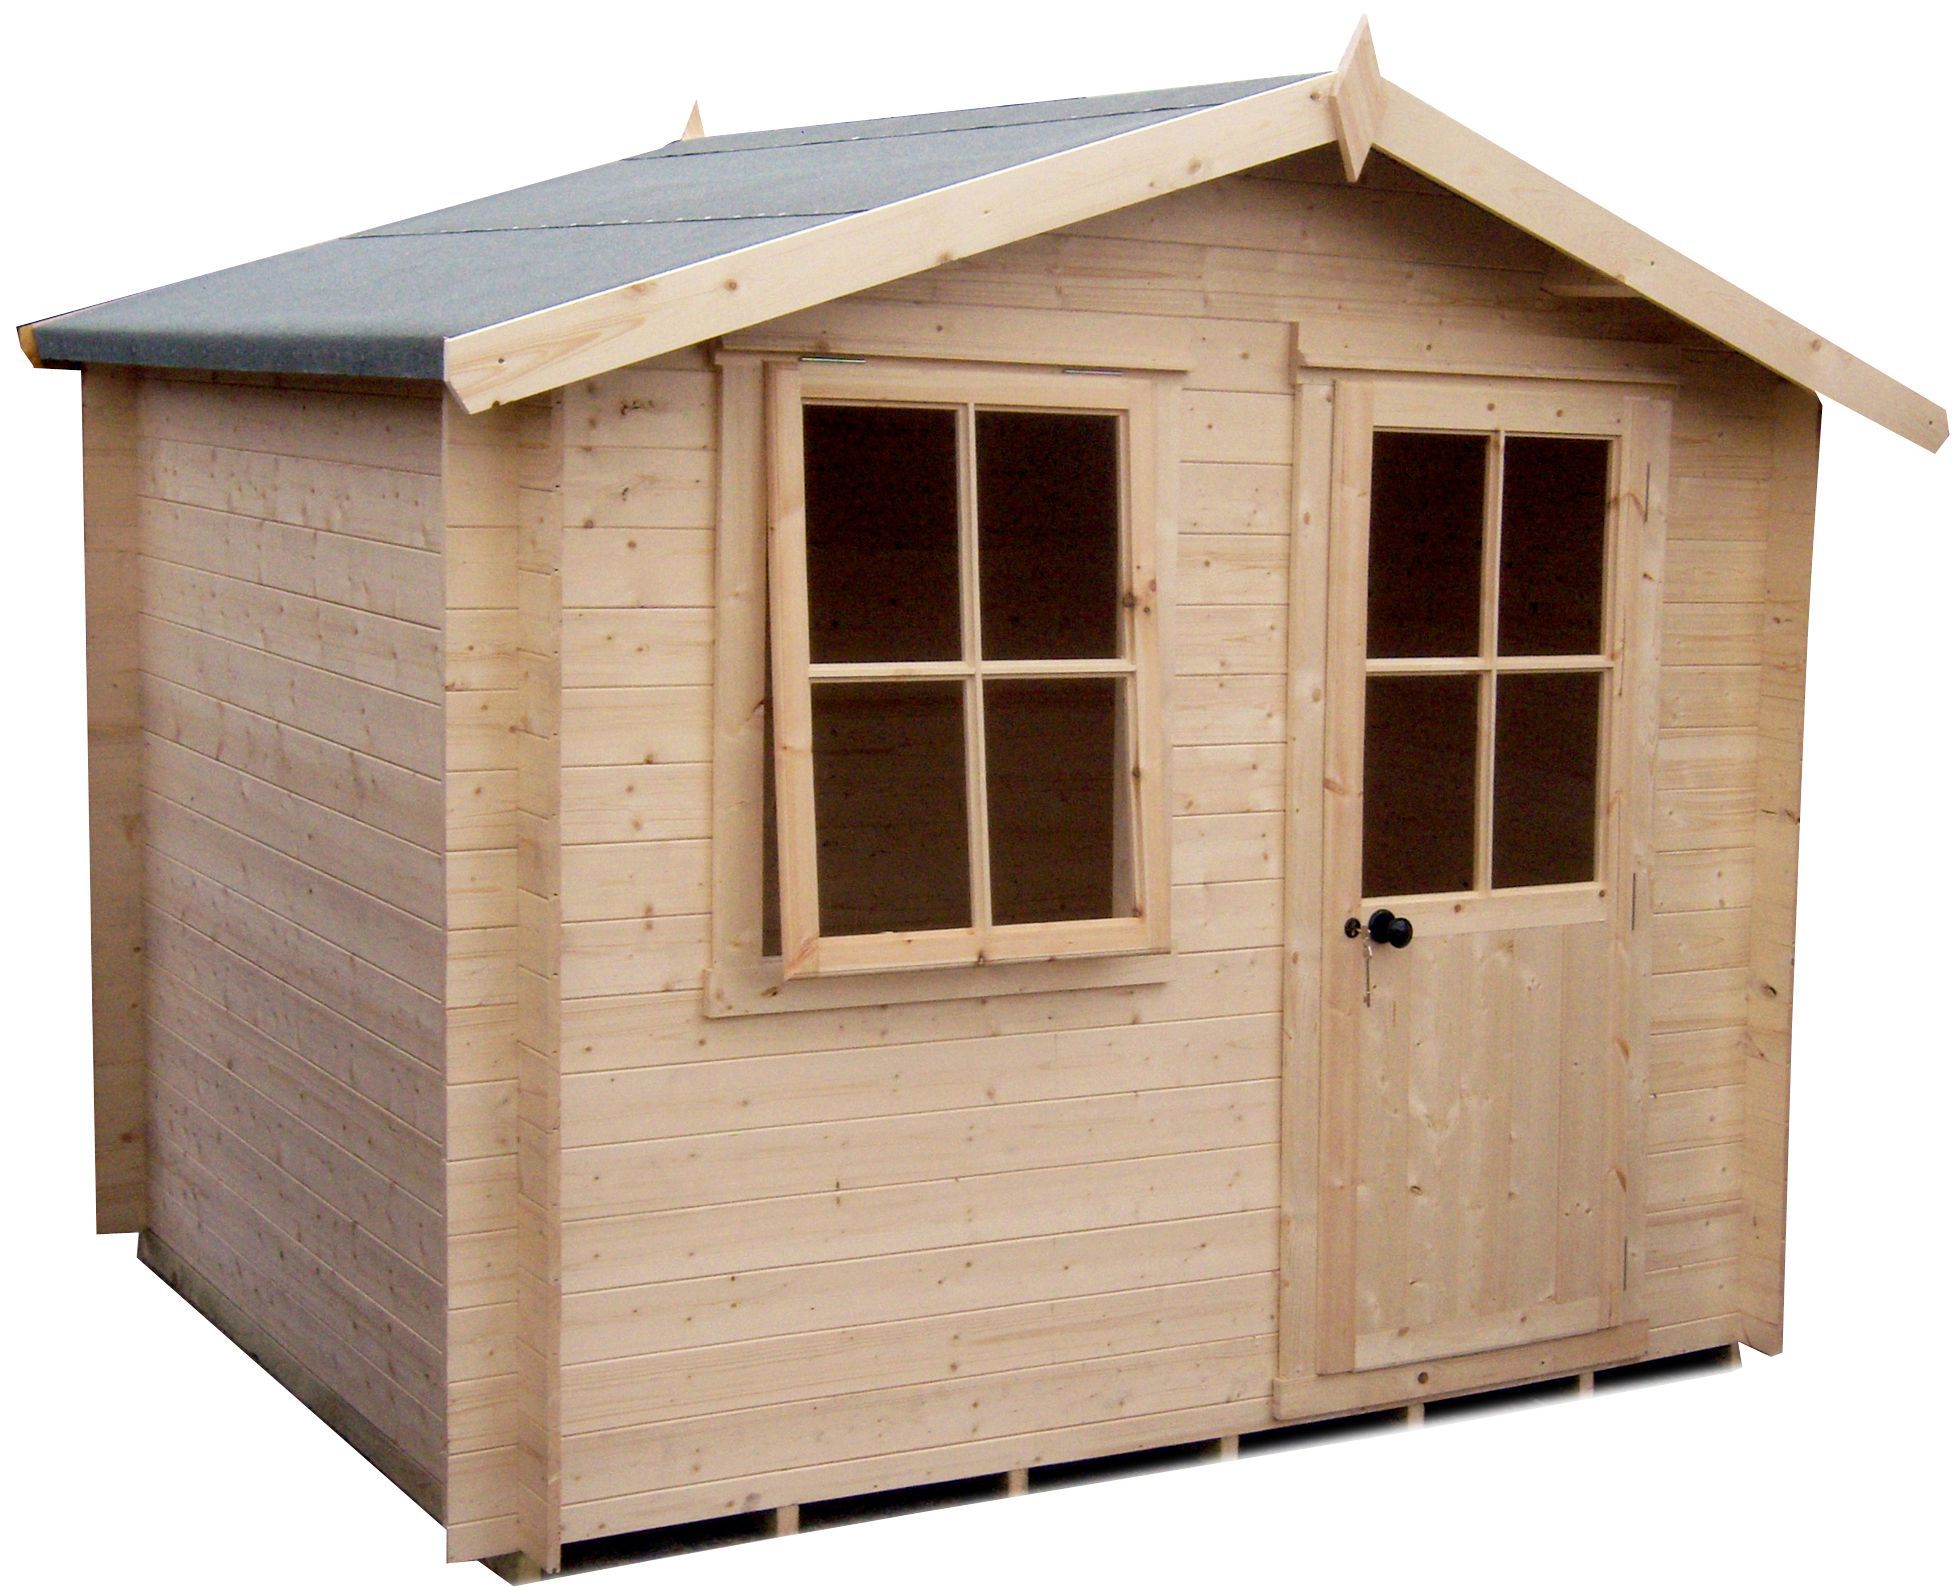 Shire Hartley 8x8 ft & 1 window Apex Wooden Cabin - Assembly service included